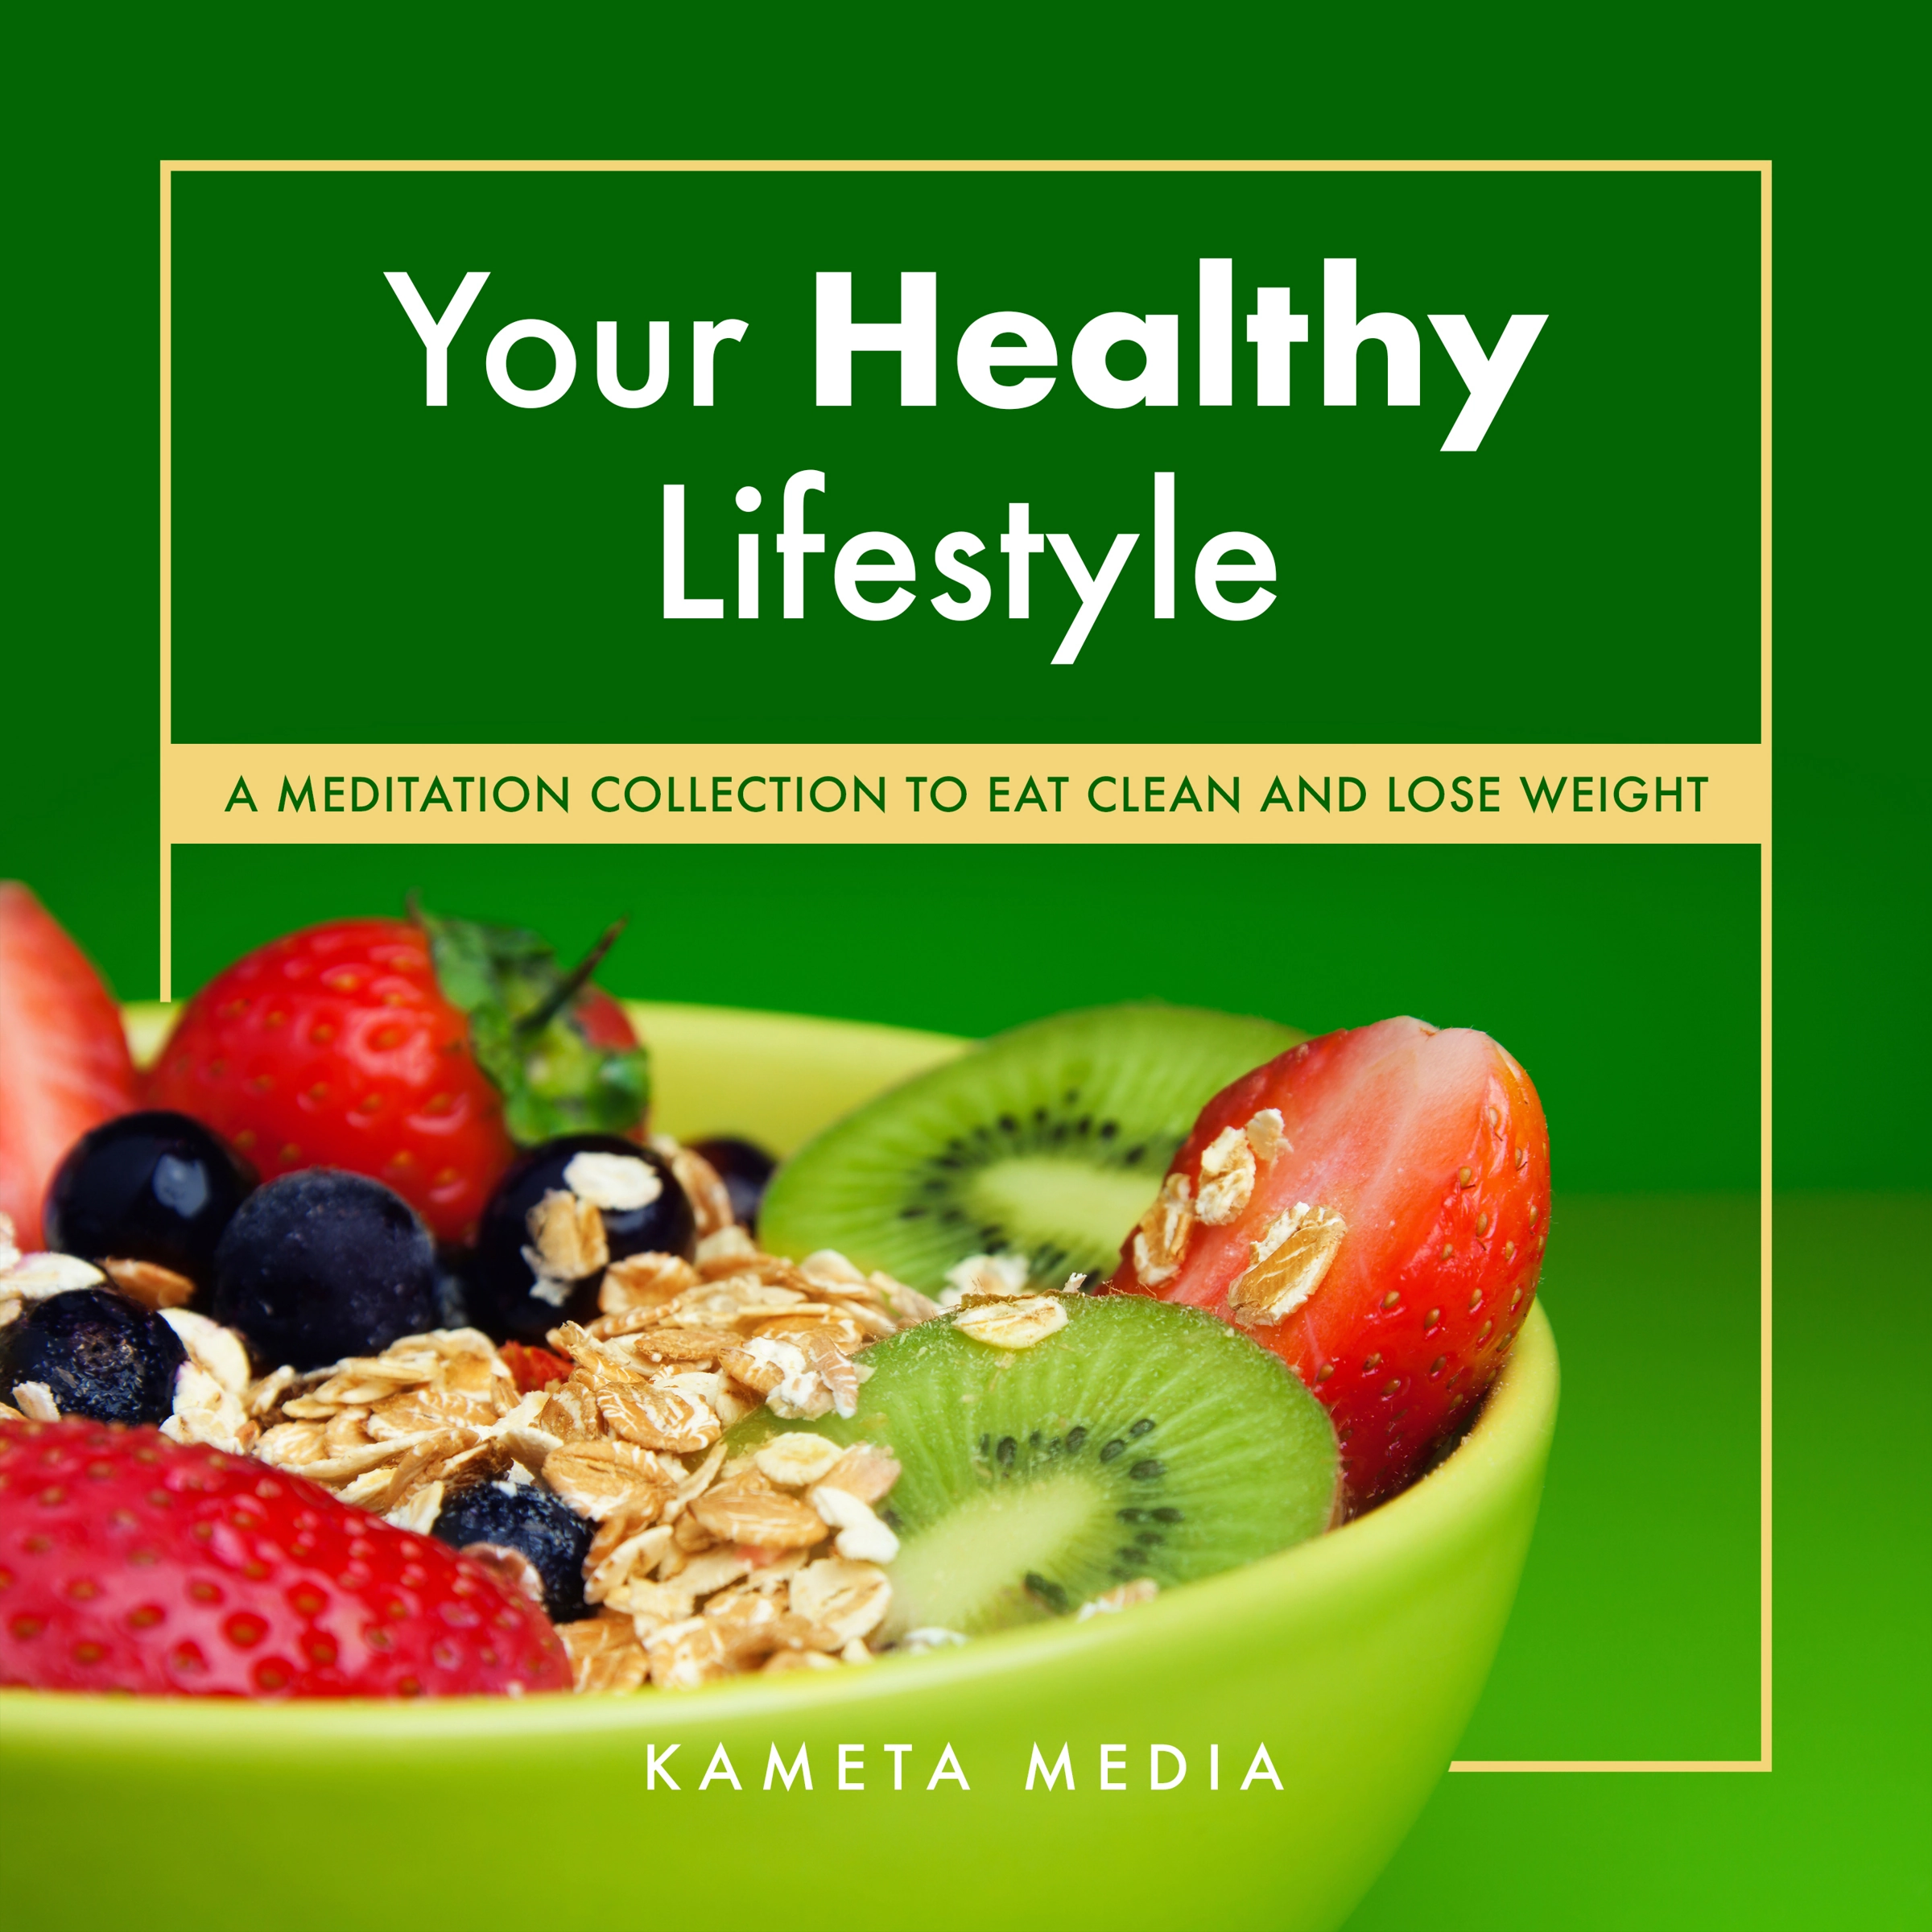 Your Healthy Lifestyle: A Meditation Collection to Eat Clean and Lose Weight Audiobook by Kameta Media